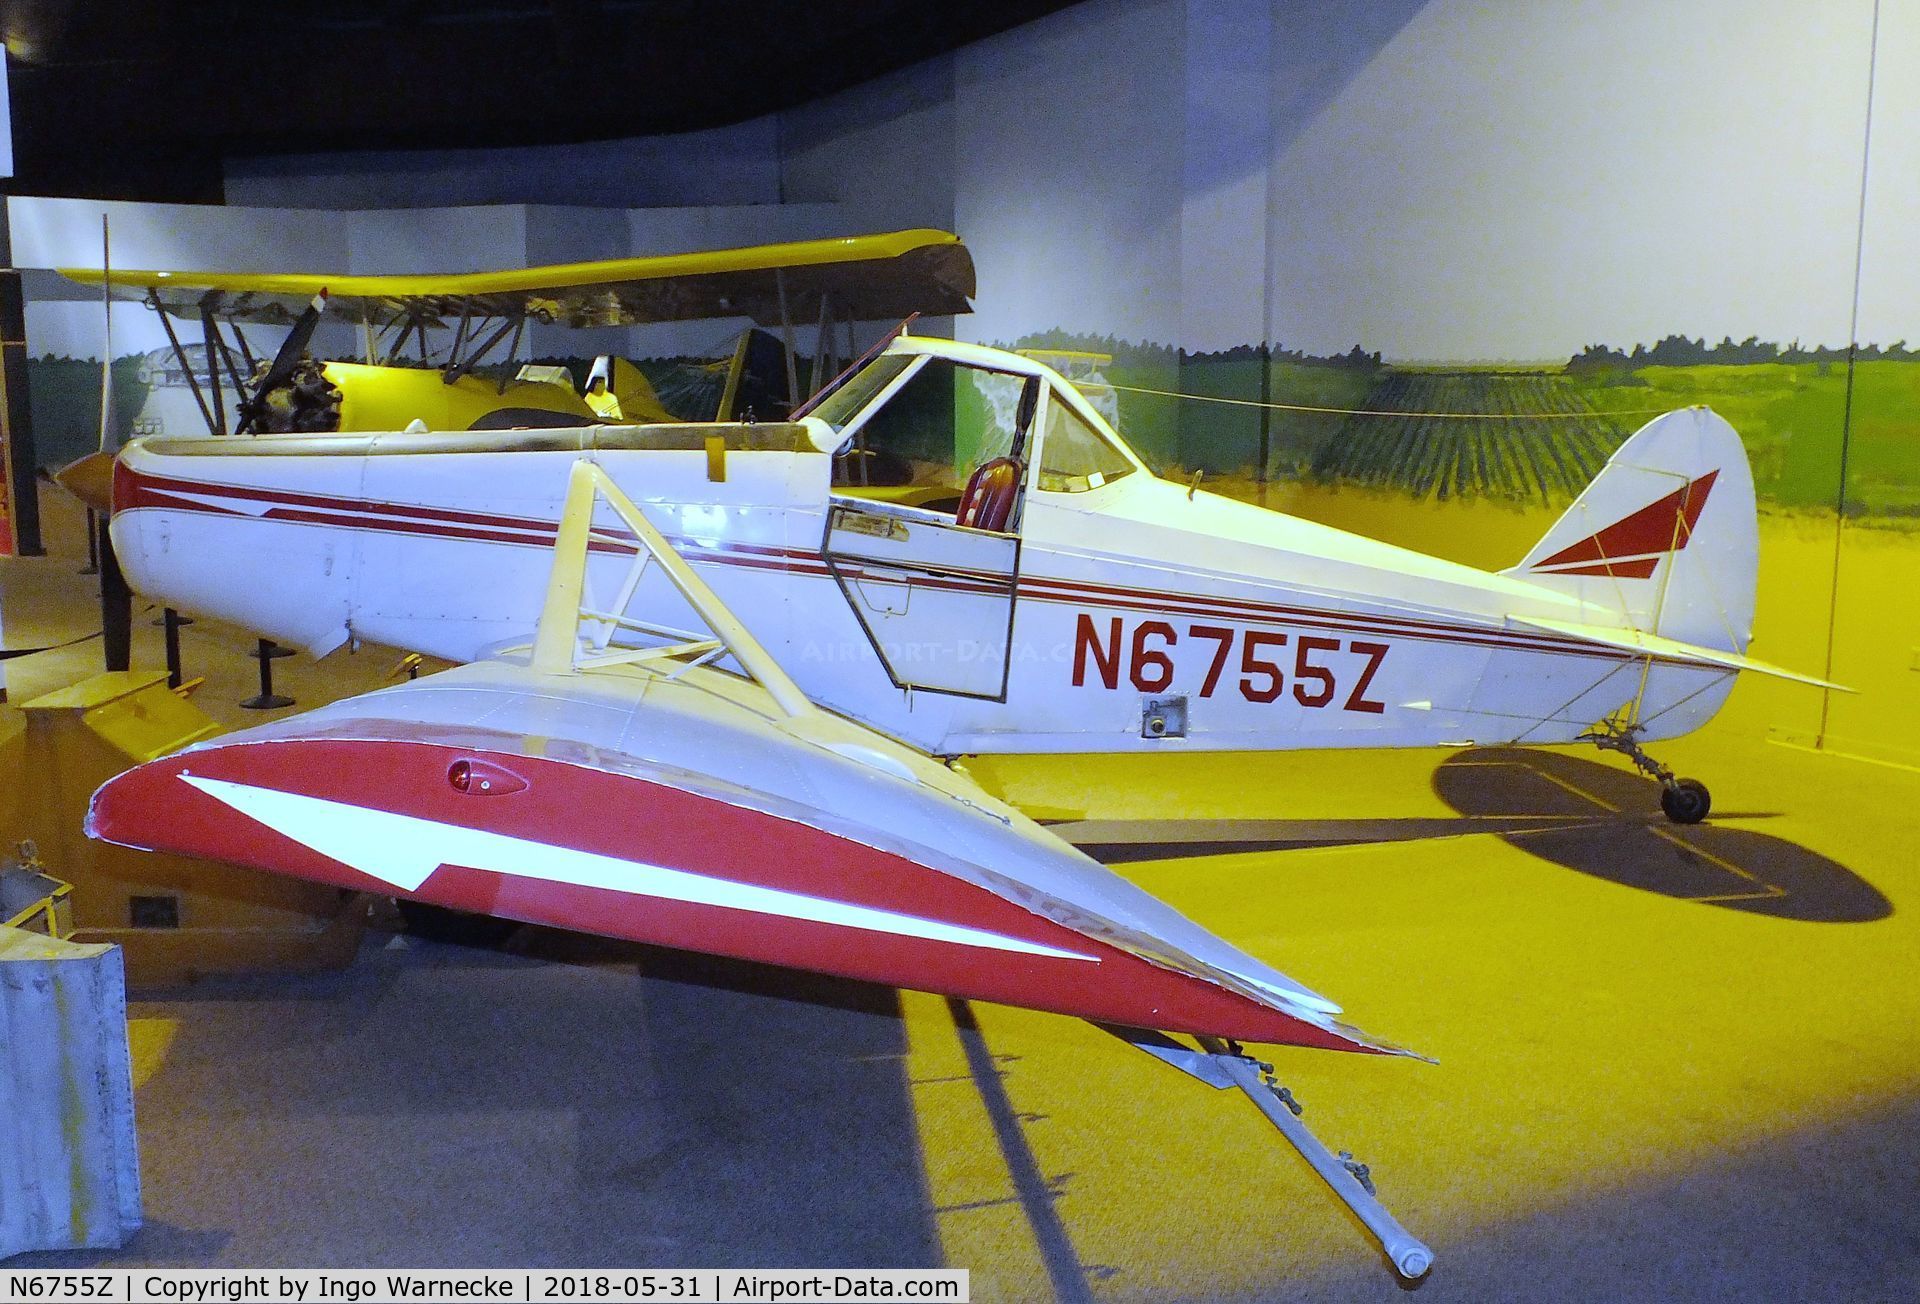 N6755Z, 1963 Piper PA-25-235 C/N 25-2375, Piper PA-25-235 Pawnee at the Mississippi Agriculture & Forestry Museum, Jackson MS